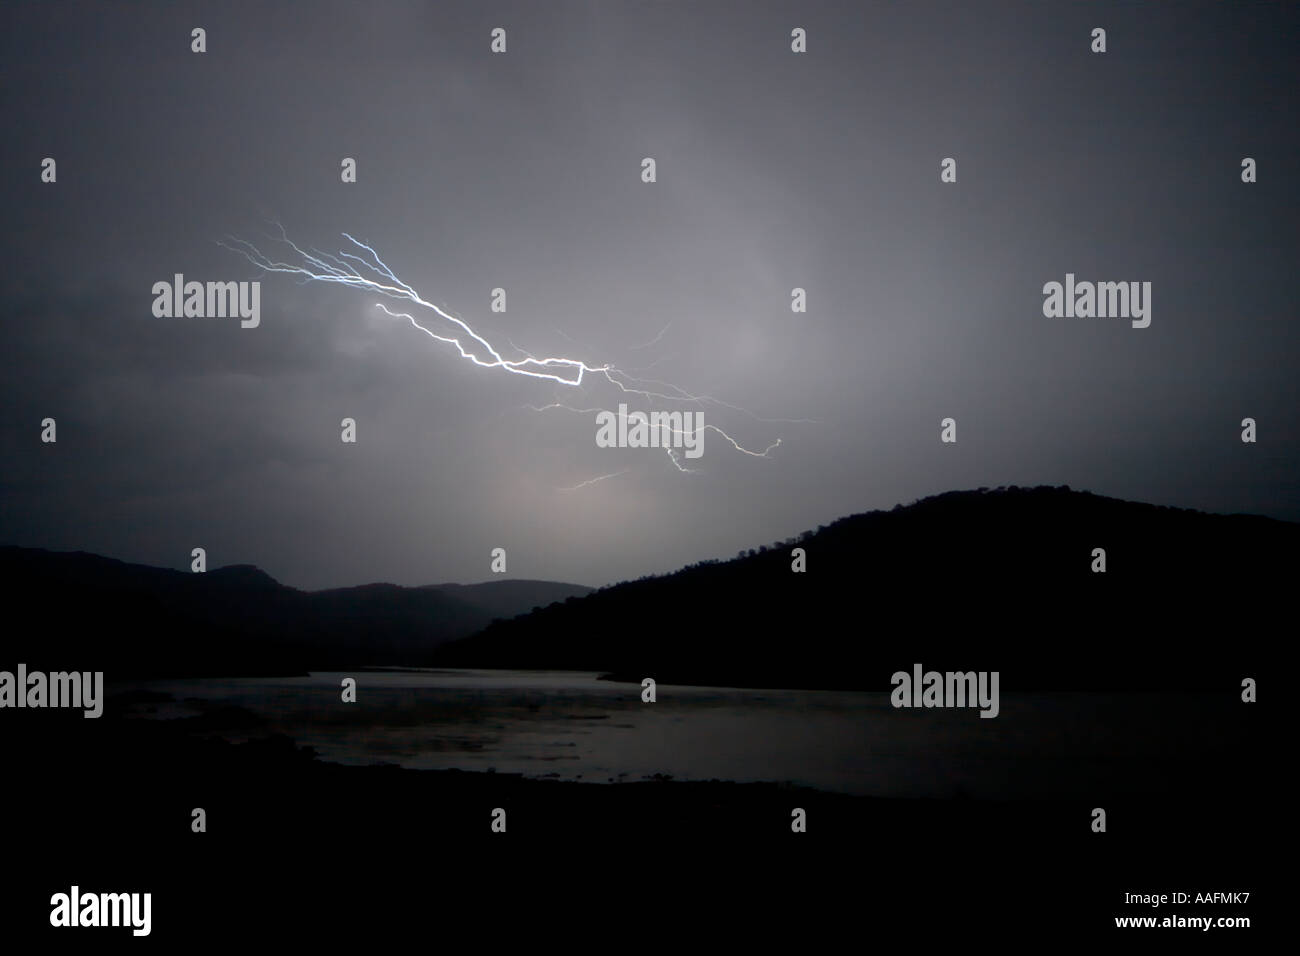 Lightning flashing between clouds over Blue Nile river mountains Stock Photo